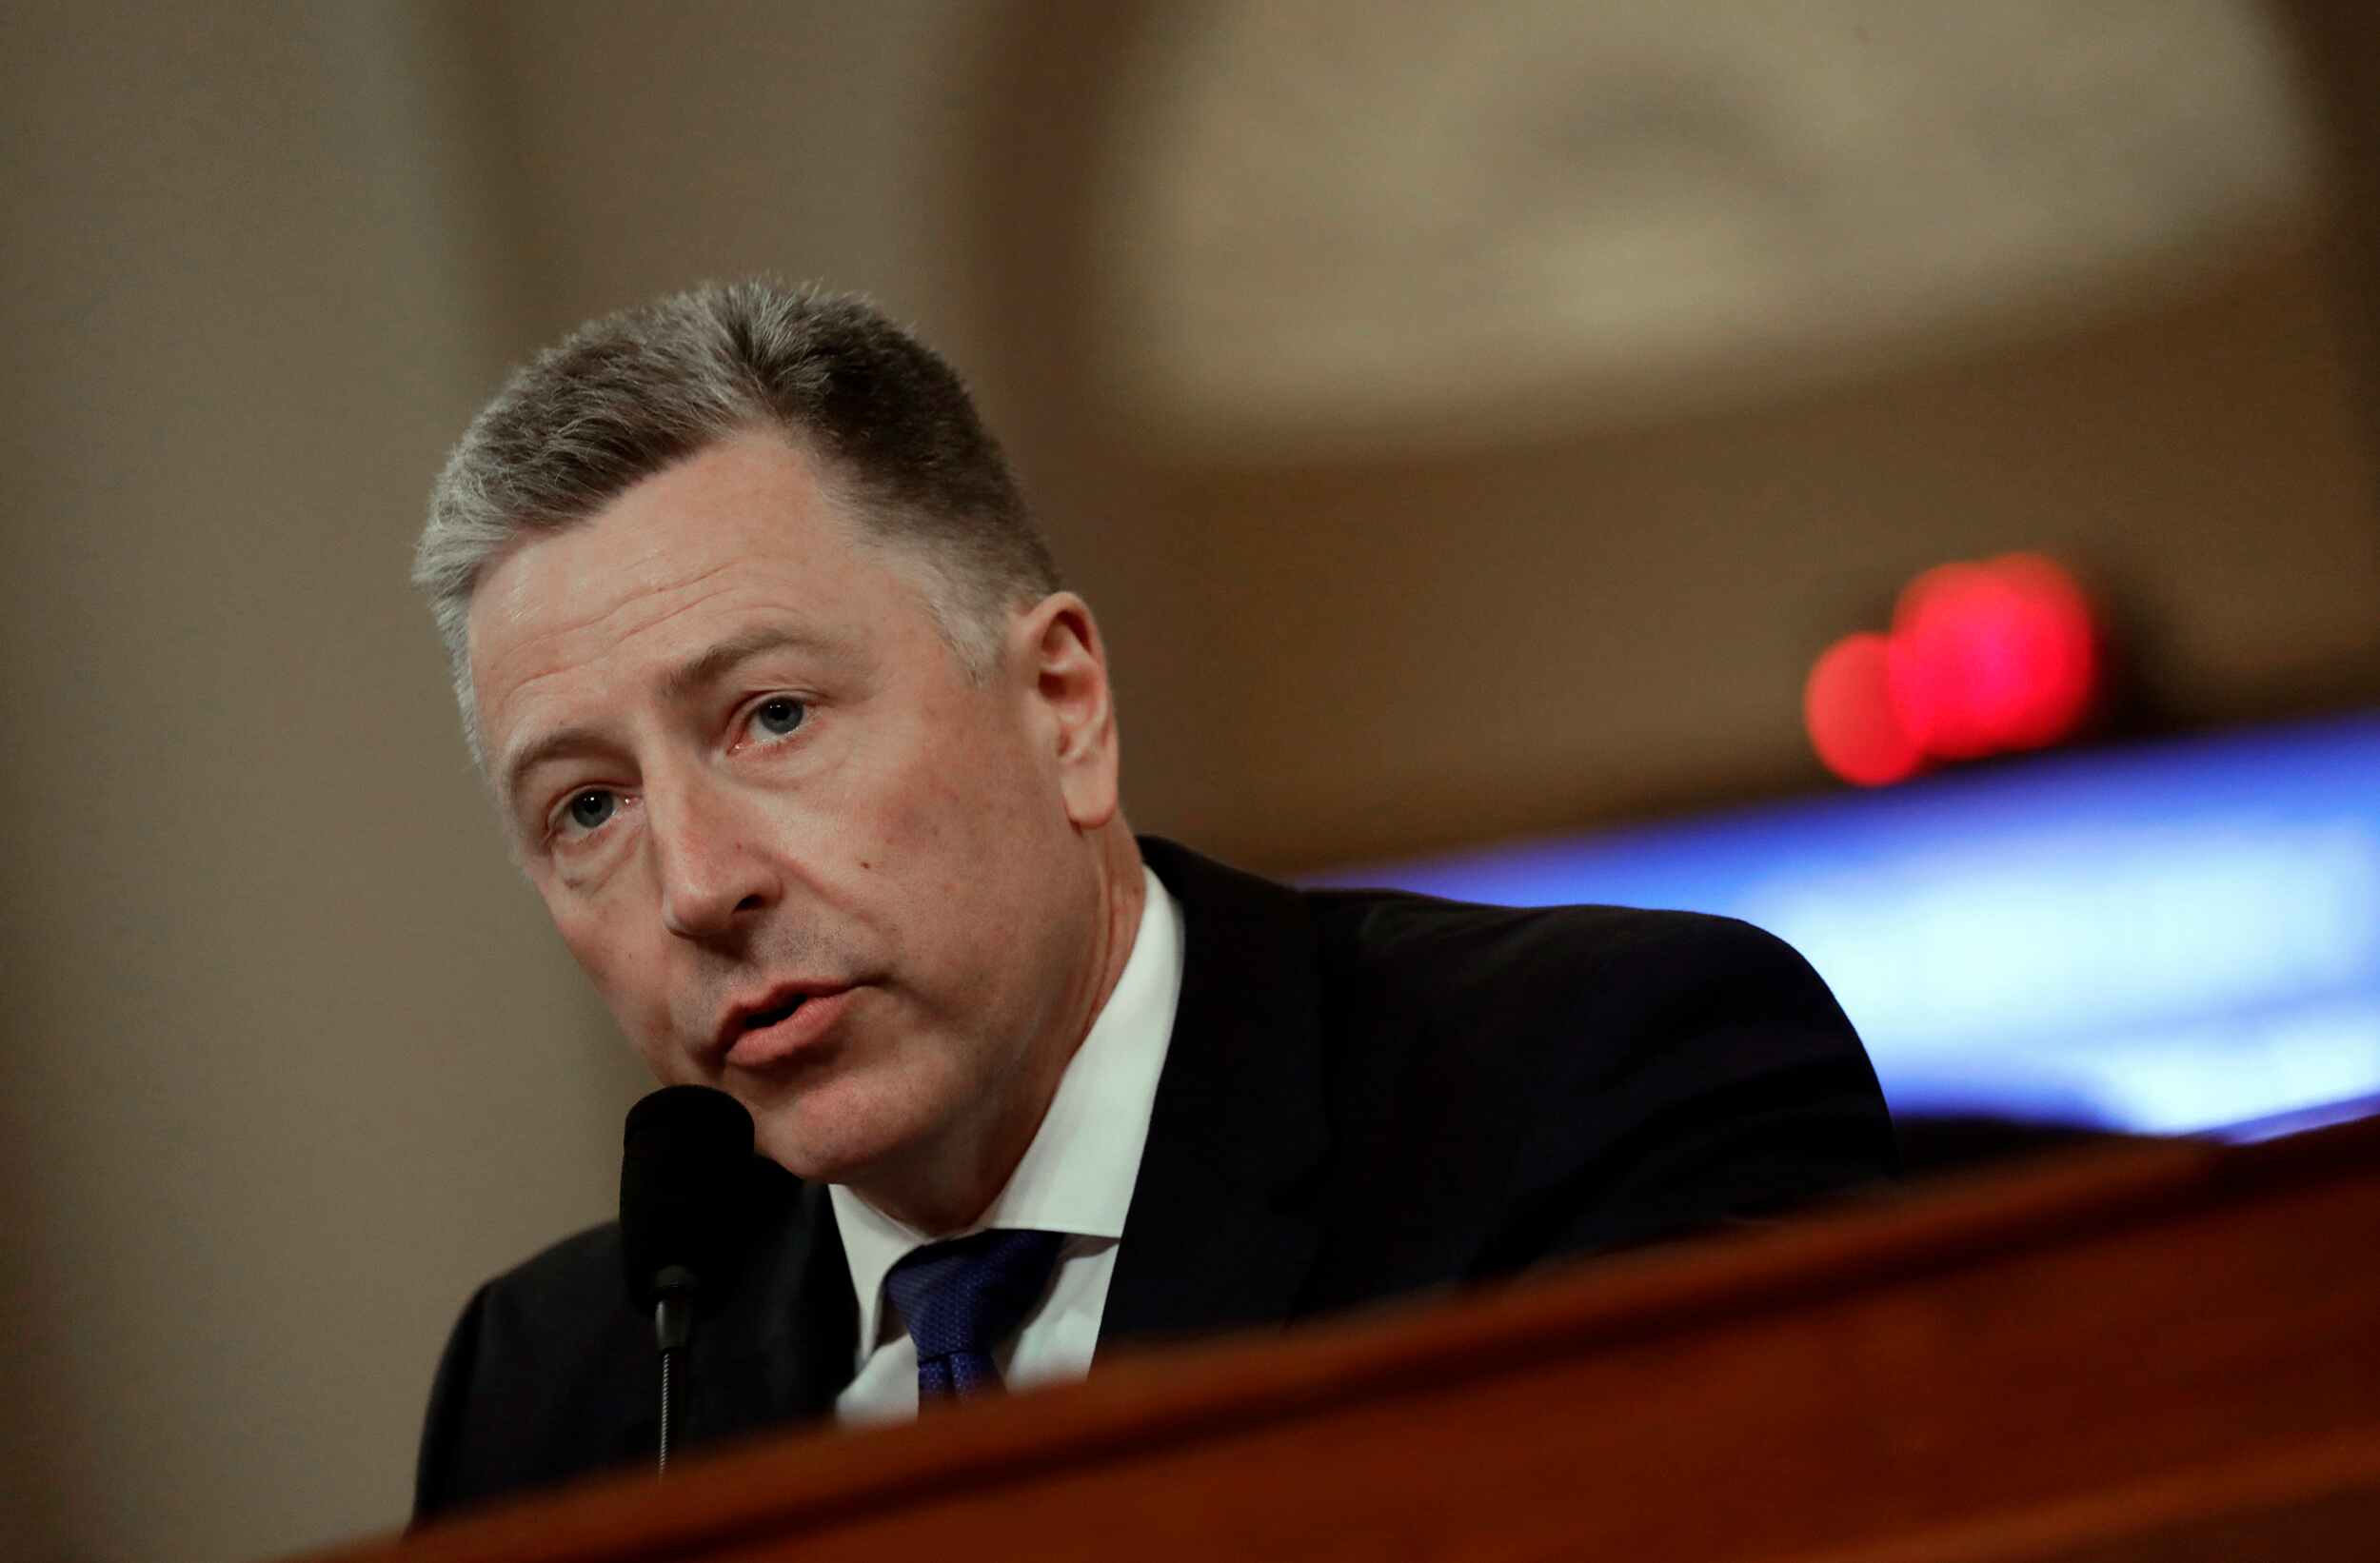 Russian invasion won't end with negotiations - Kurt Volker